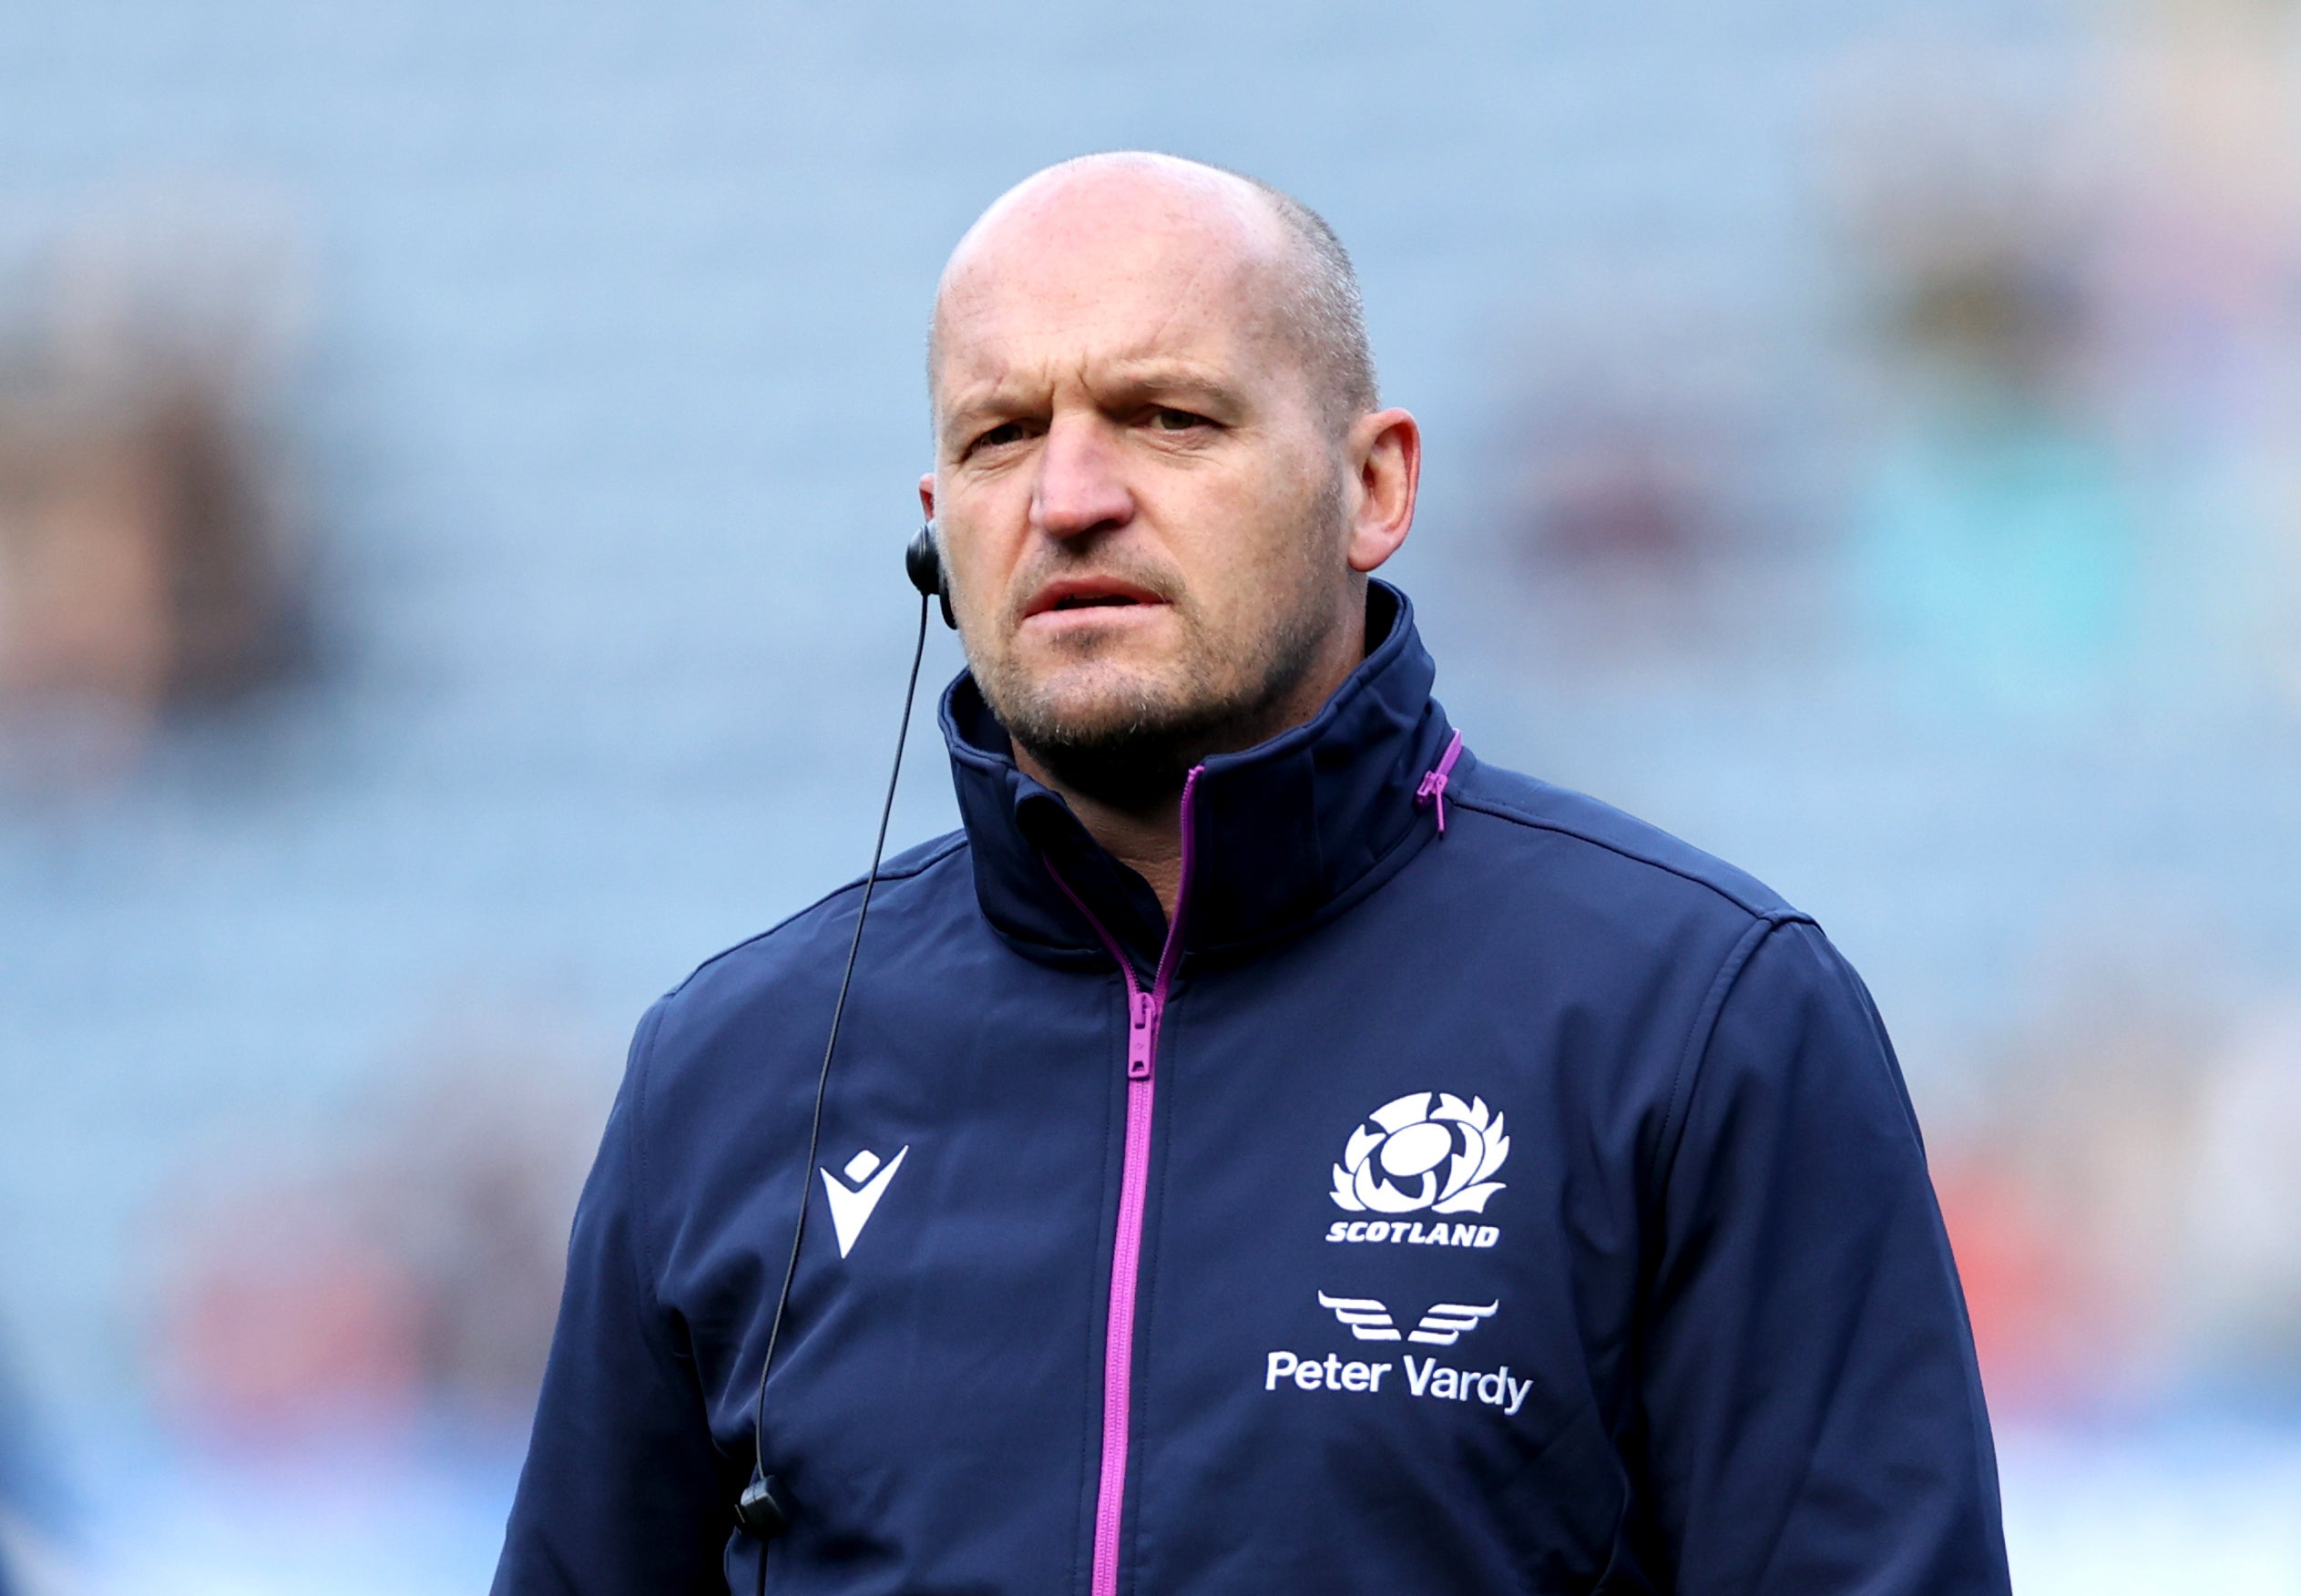 Gregor Townsend is relishing Saturday’s Calcutta Cup match (Steve Welsh/PA)